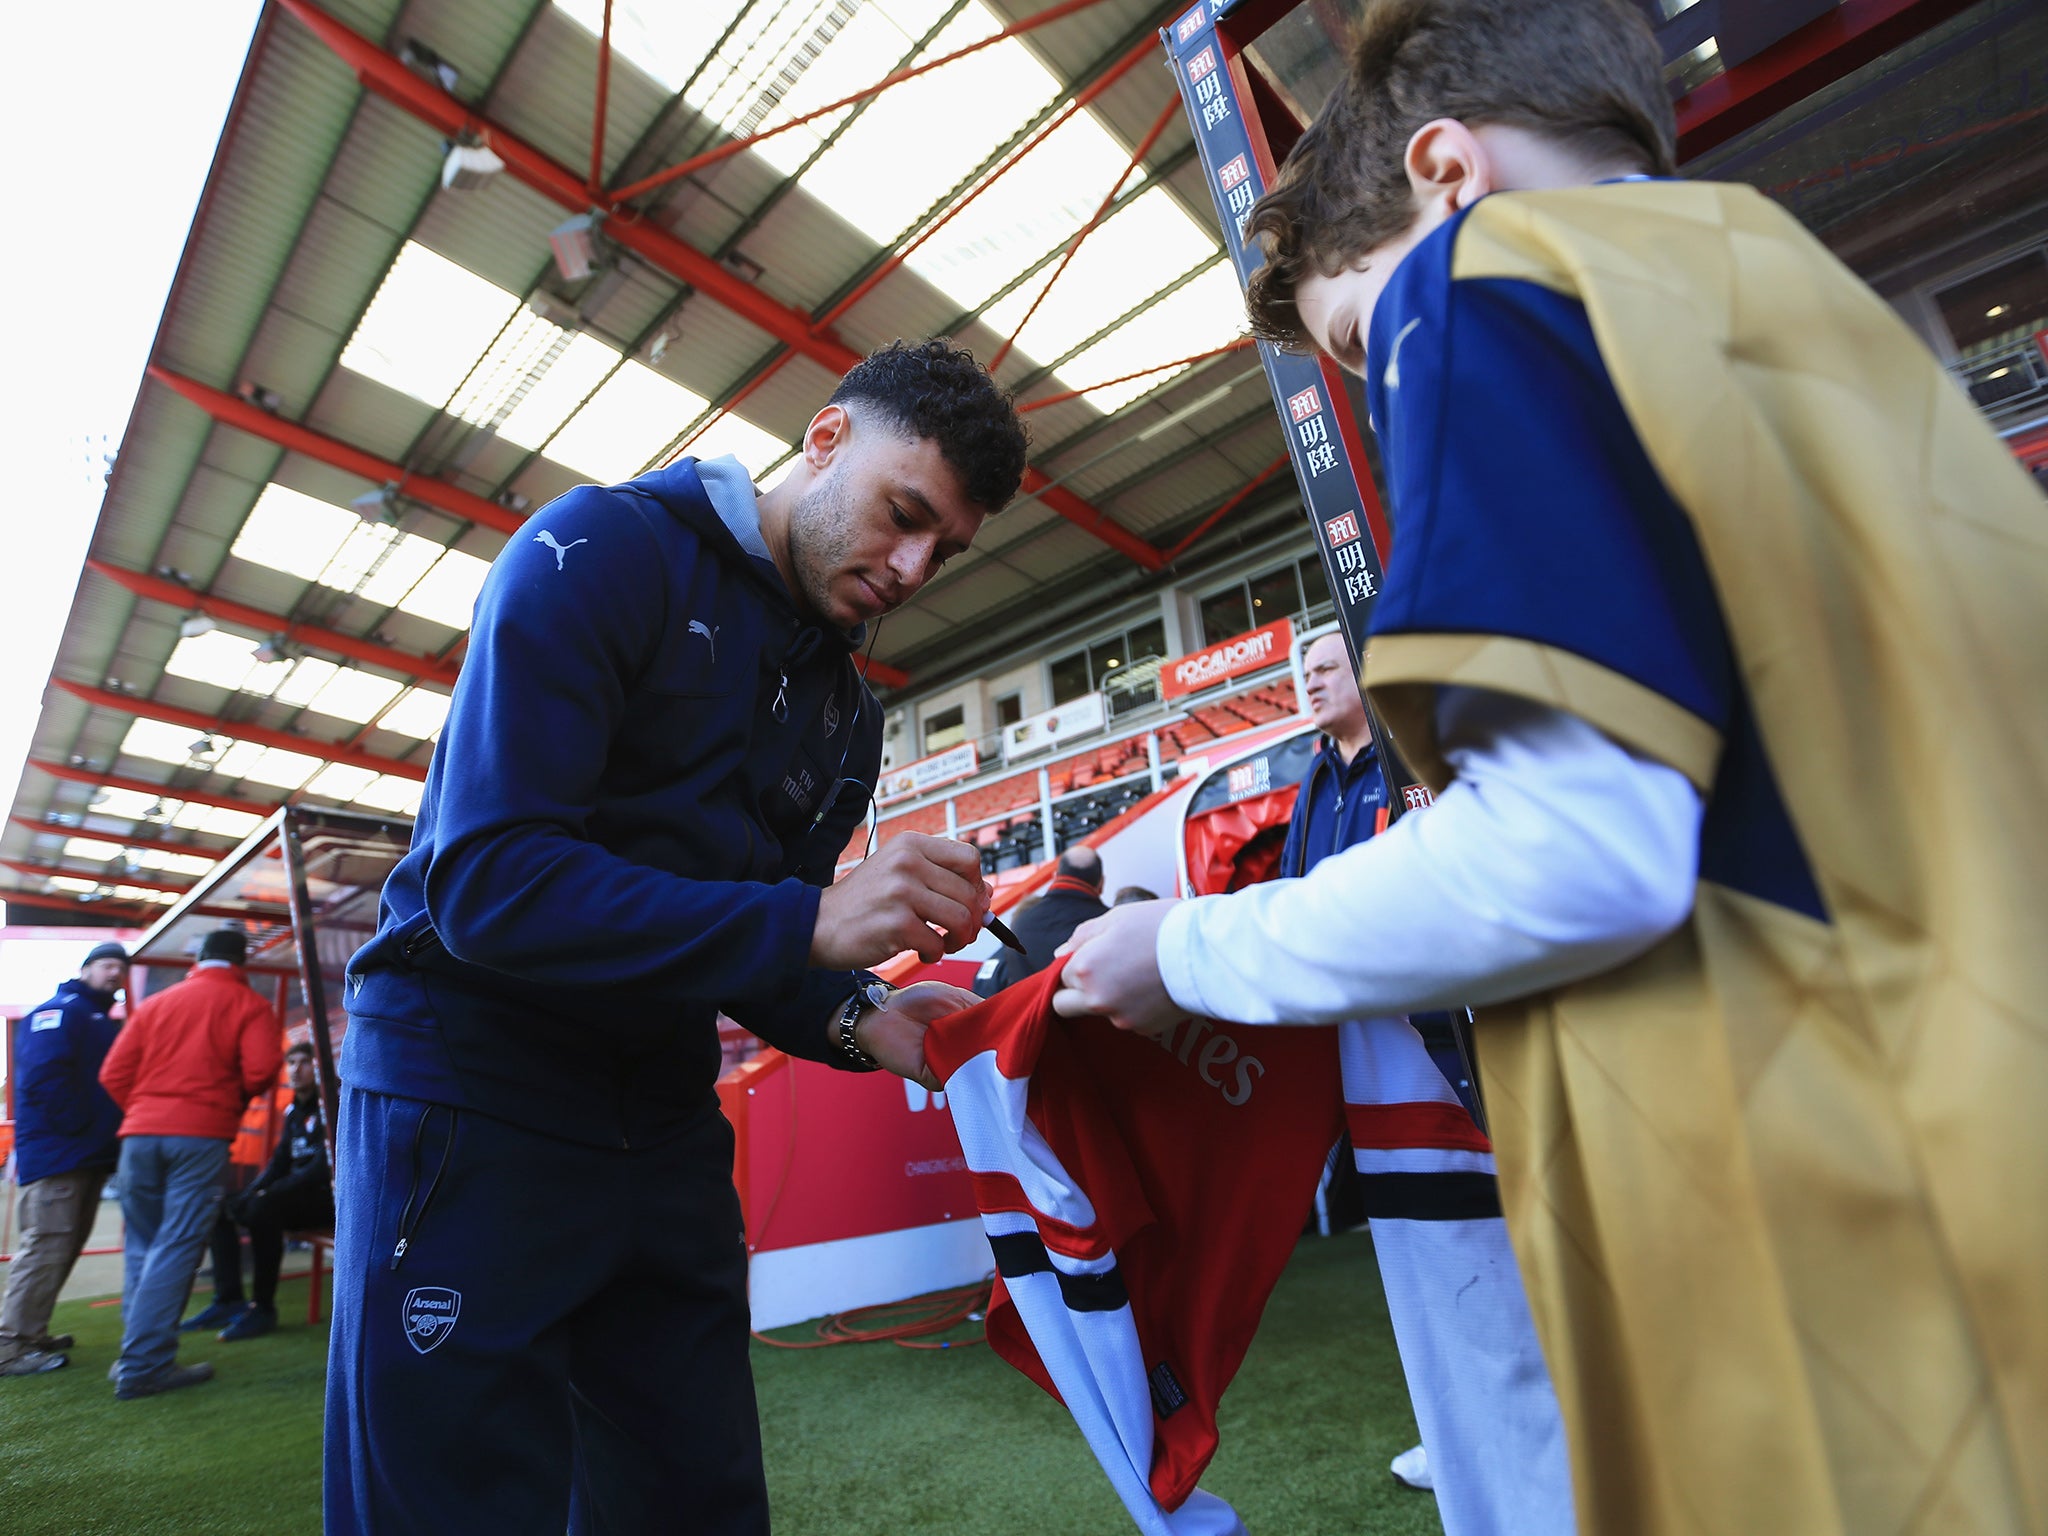 Arsenal winger Alex Oxlade-Chamberlain signs a shirt at the Vitality Stadium